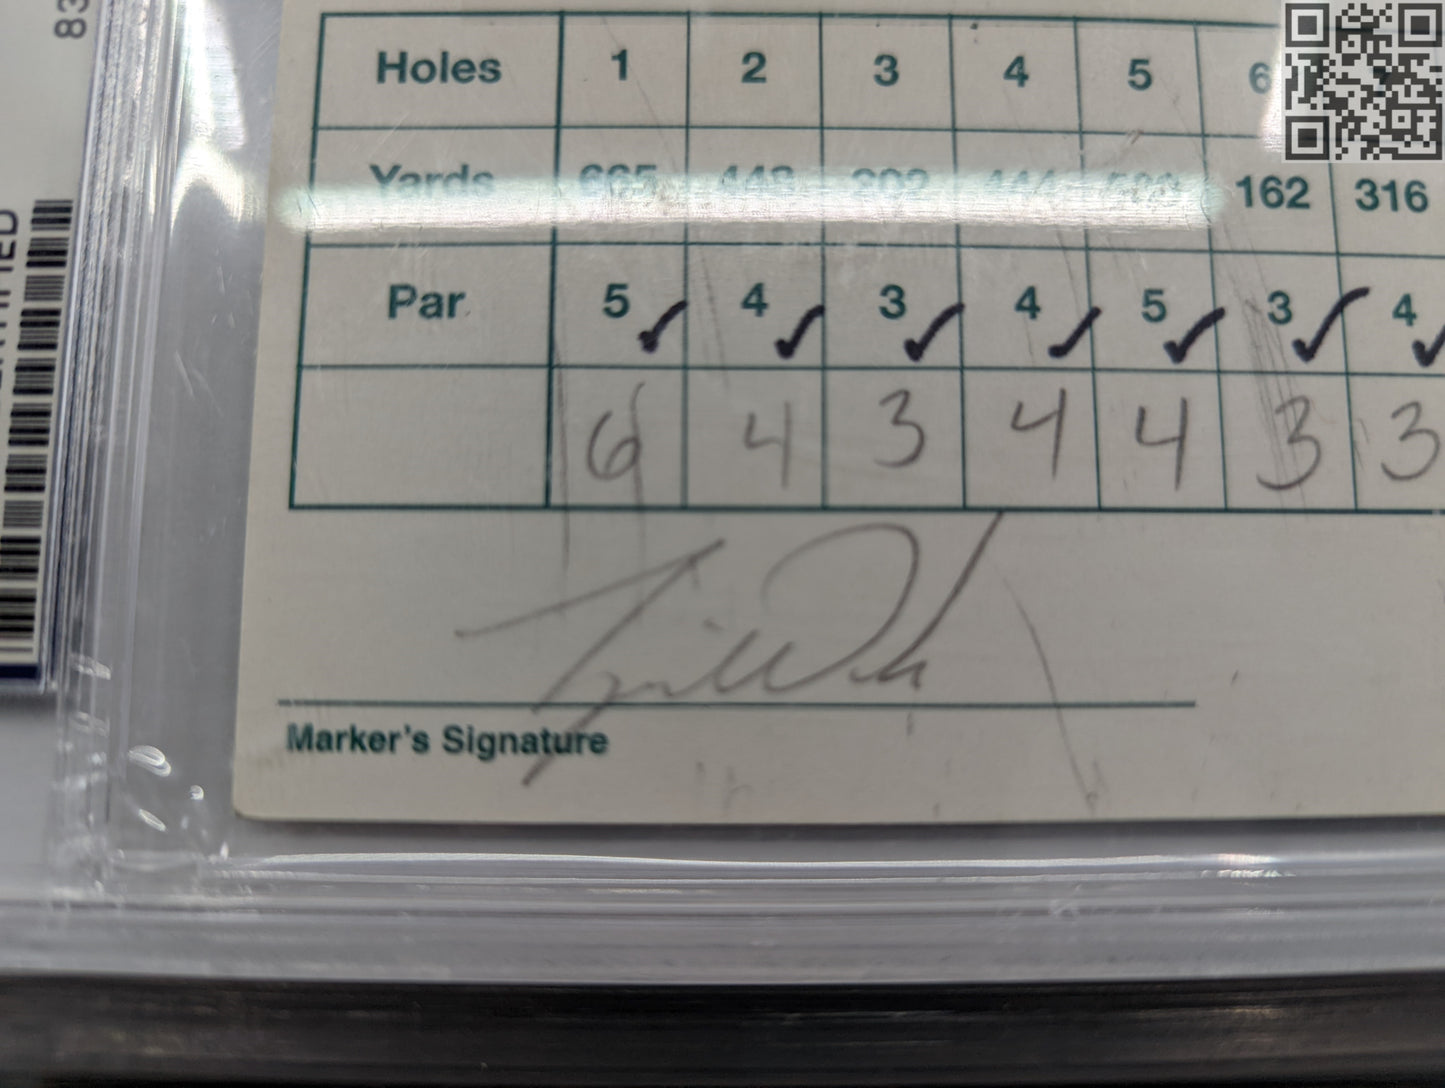 1996 Tiger Woods Signed Official Tournament Scorecard 1st Round La Cantera Texas Open